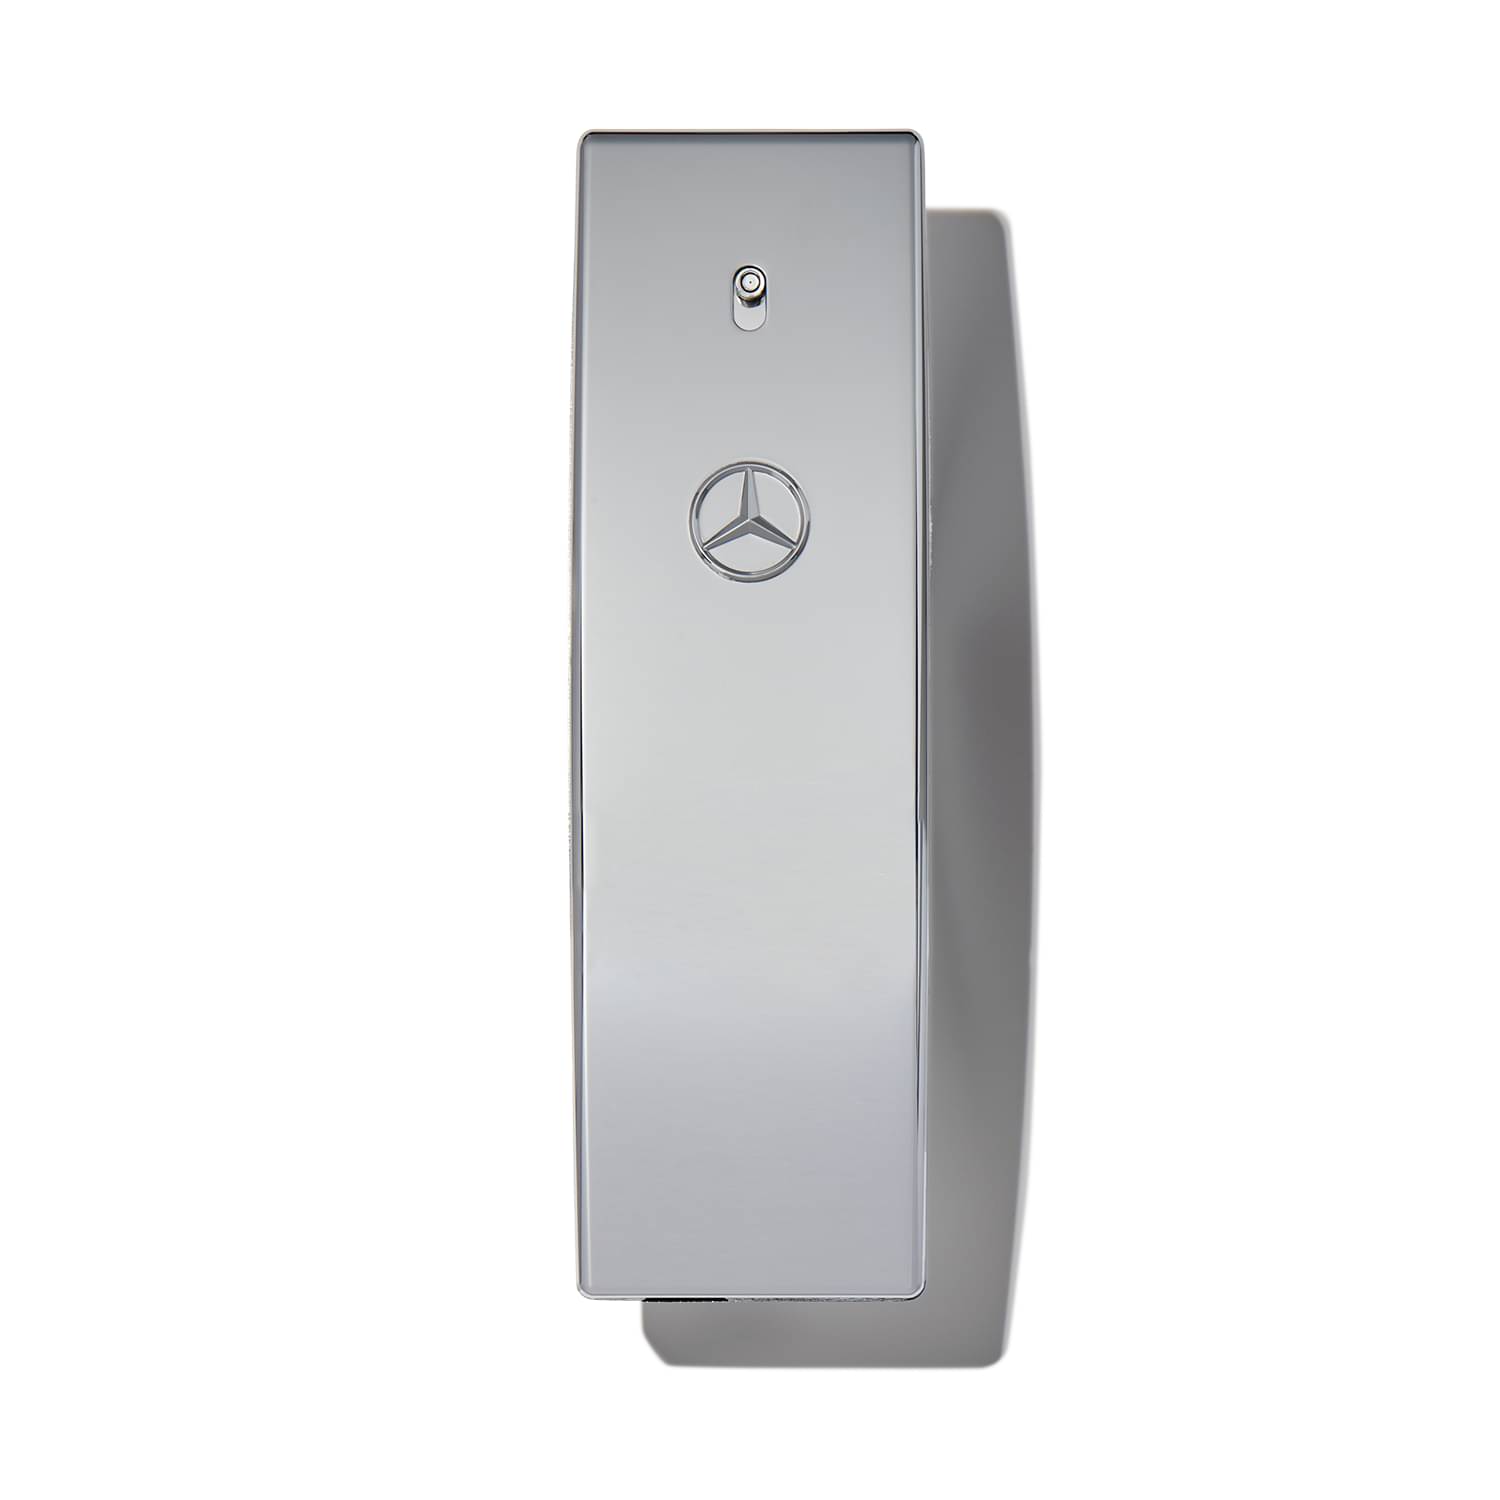 Club by Mercedes-Benz $16.95/month